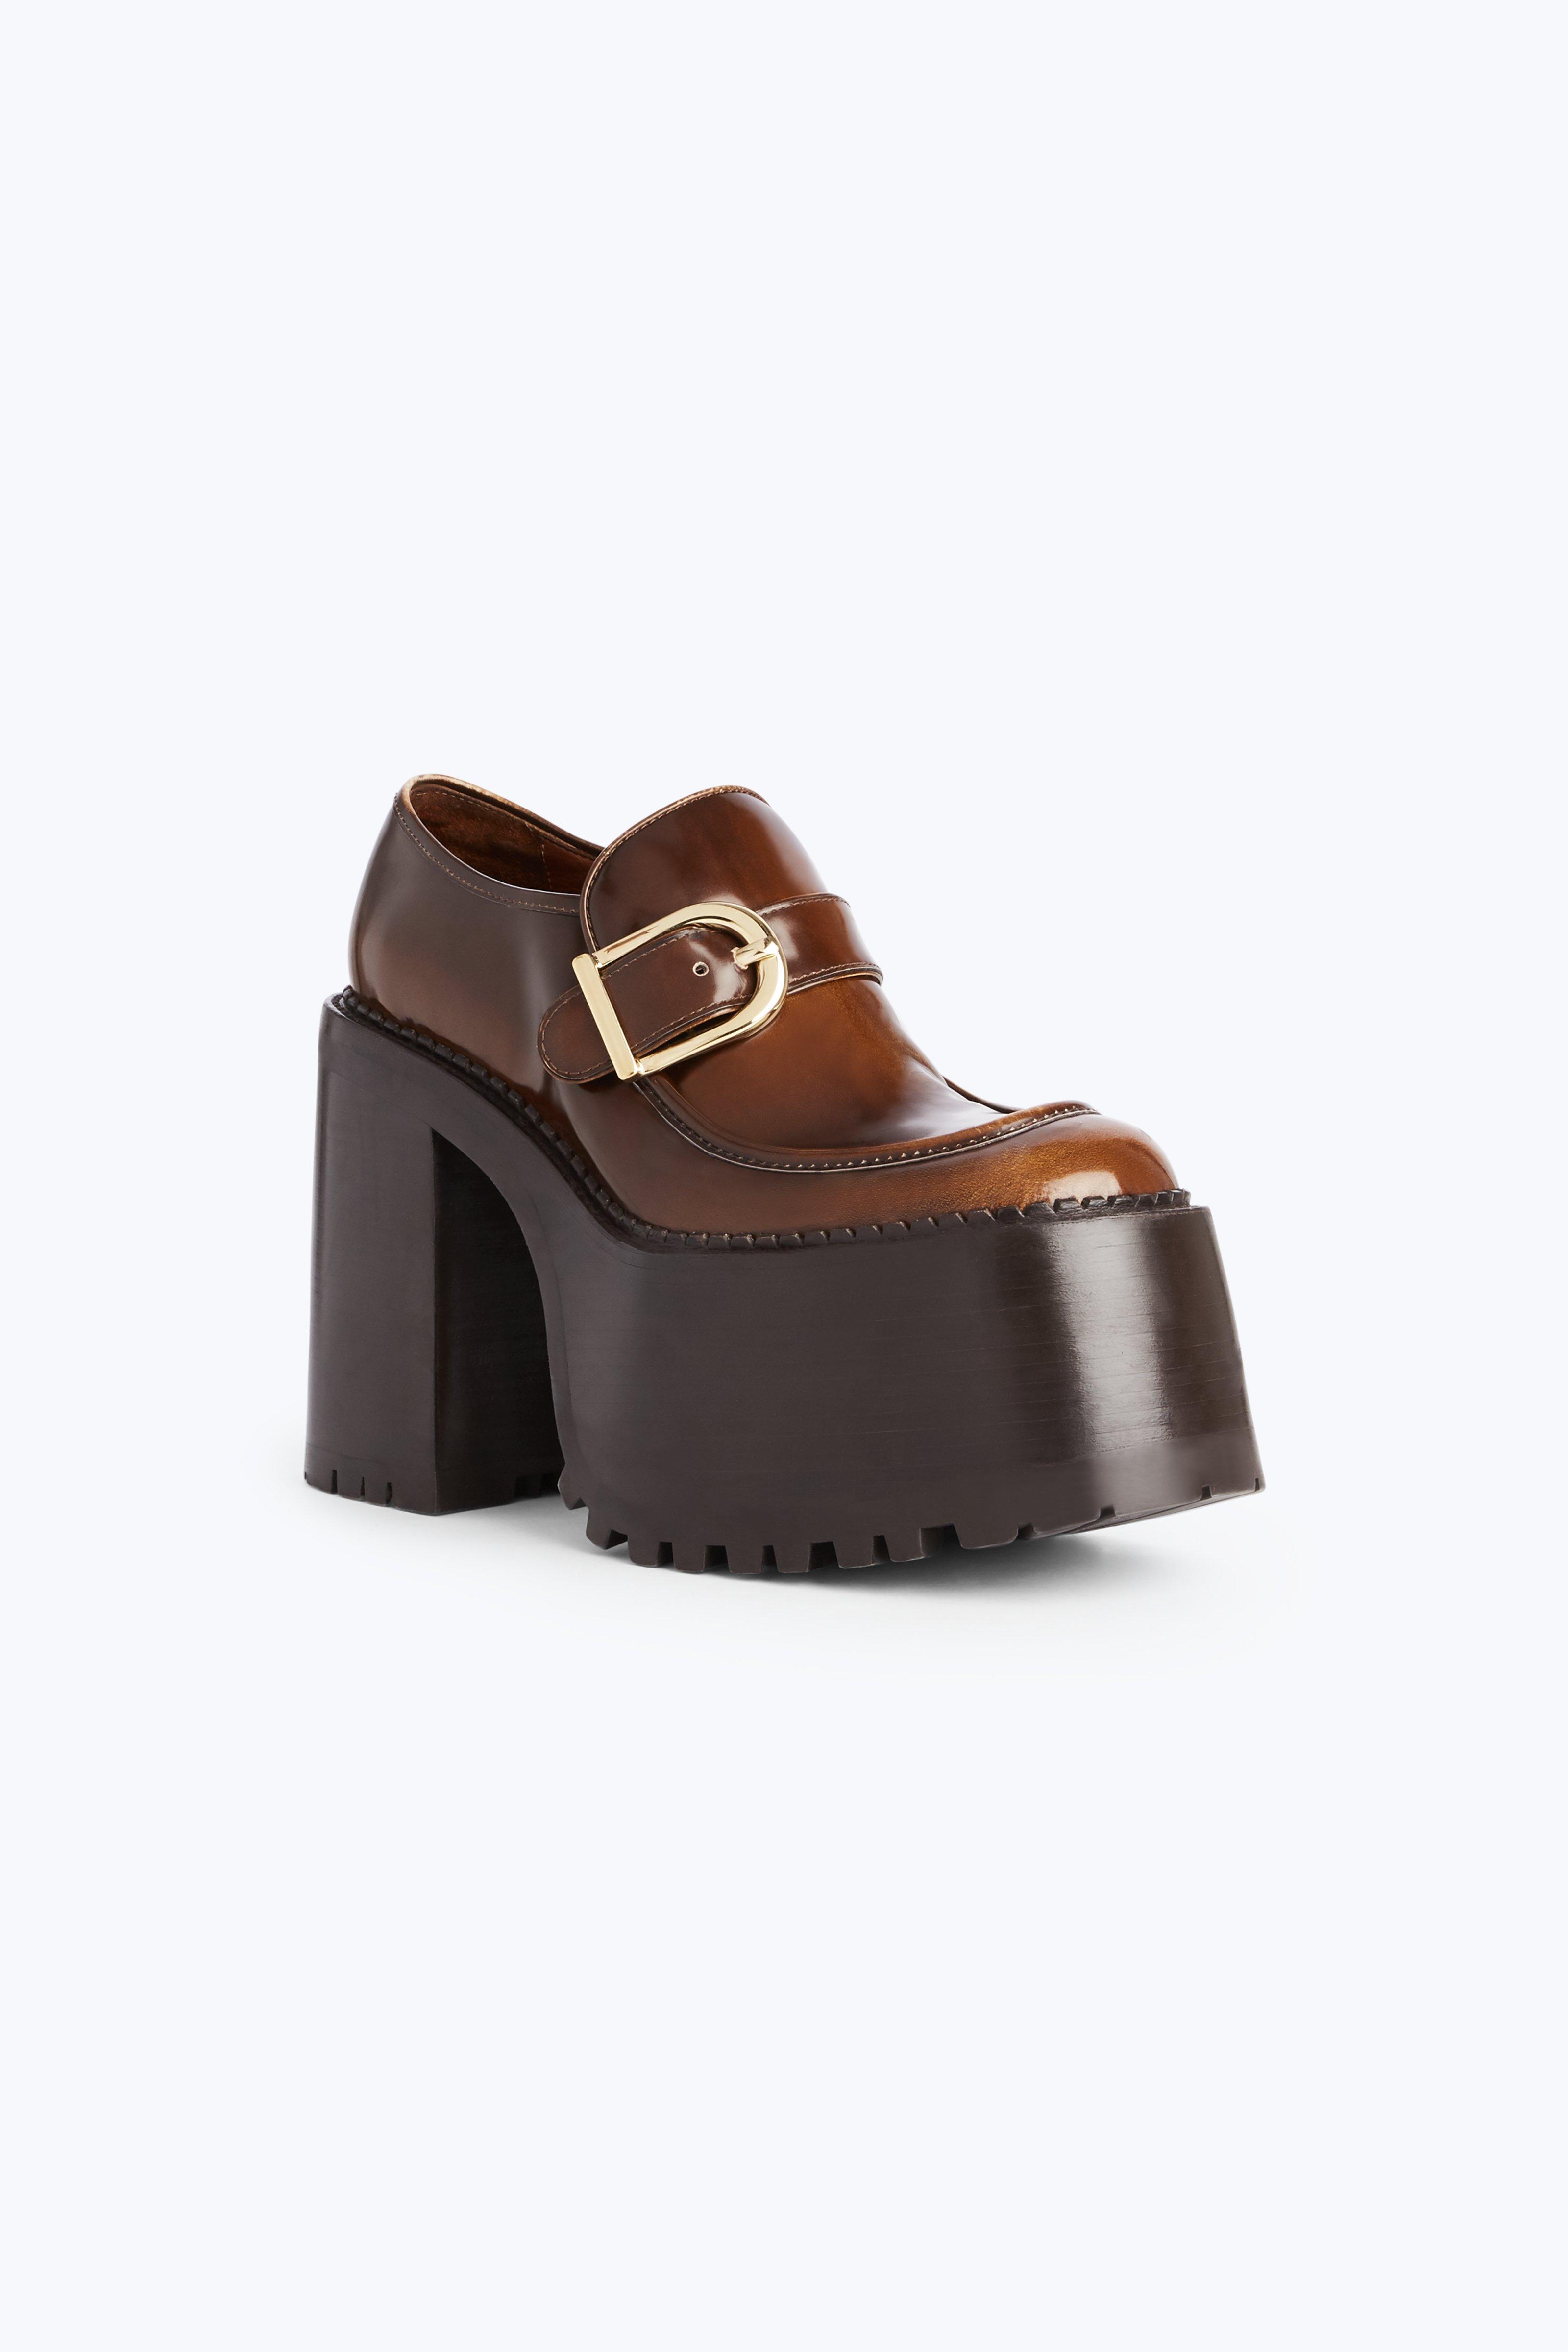 Marc Jacobs Ruth Platform Buckle Loafer in Brown | Lyst